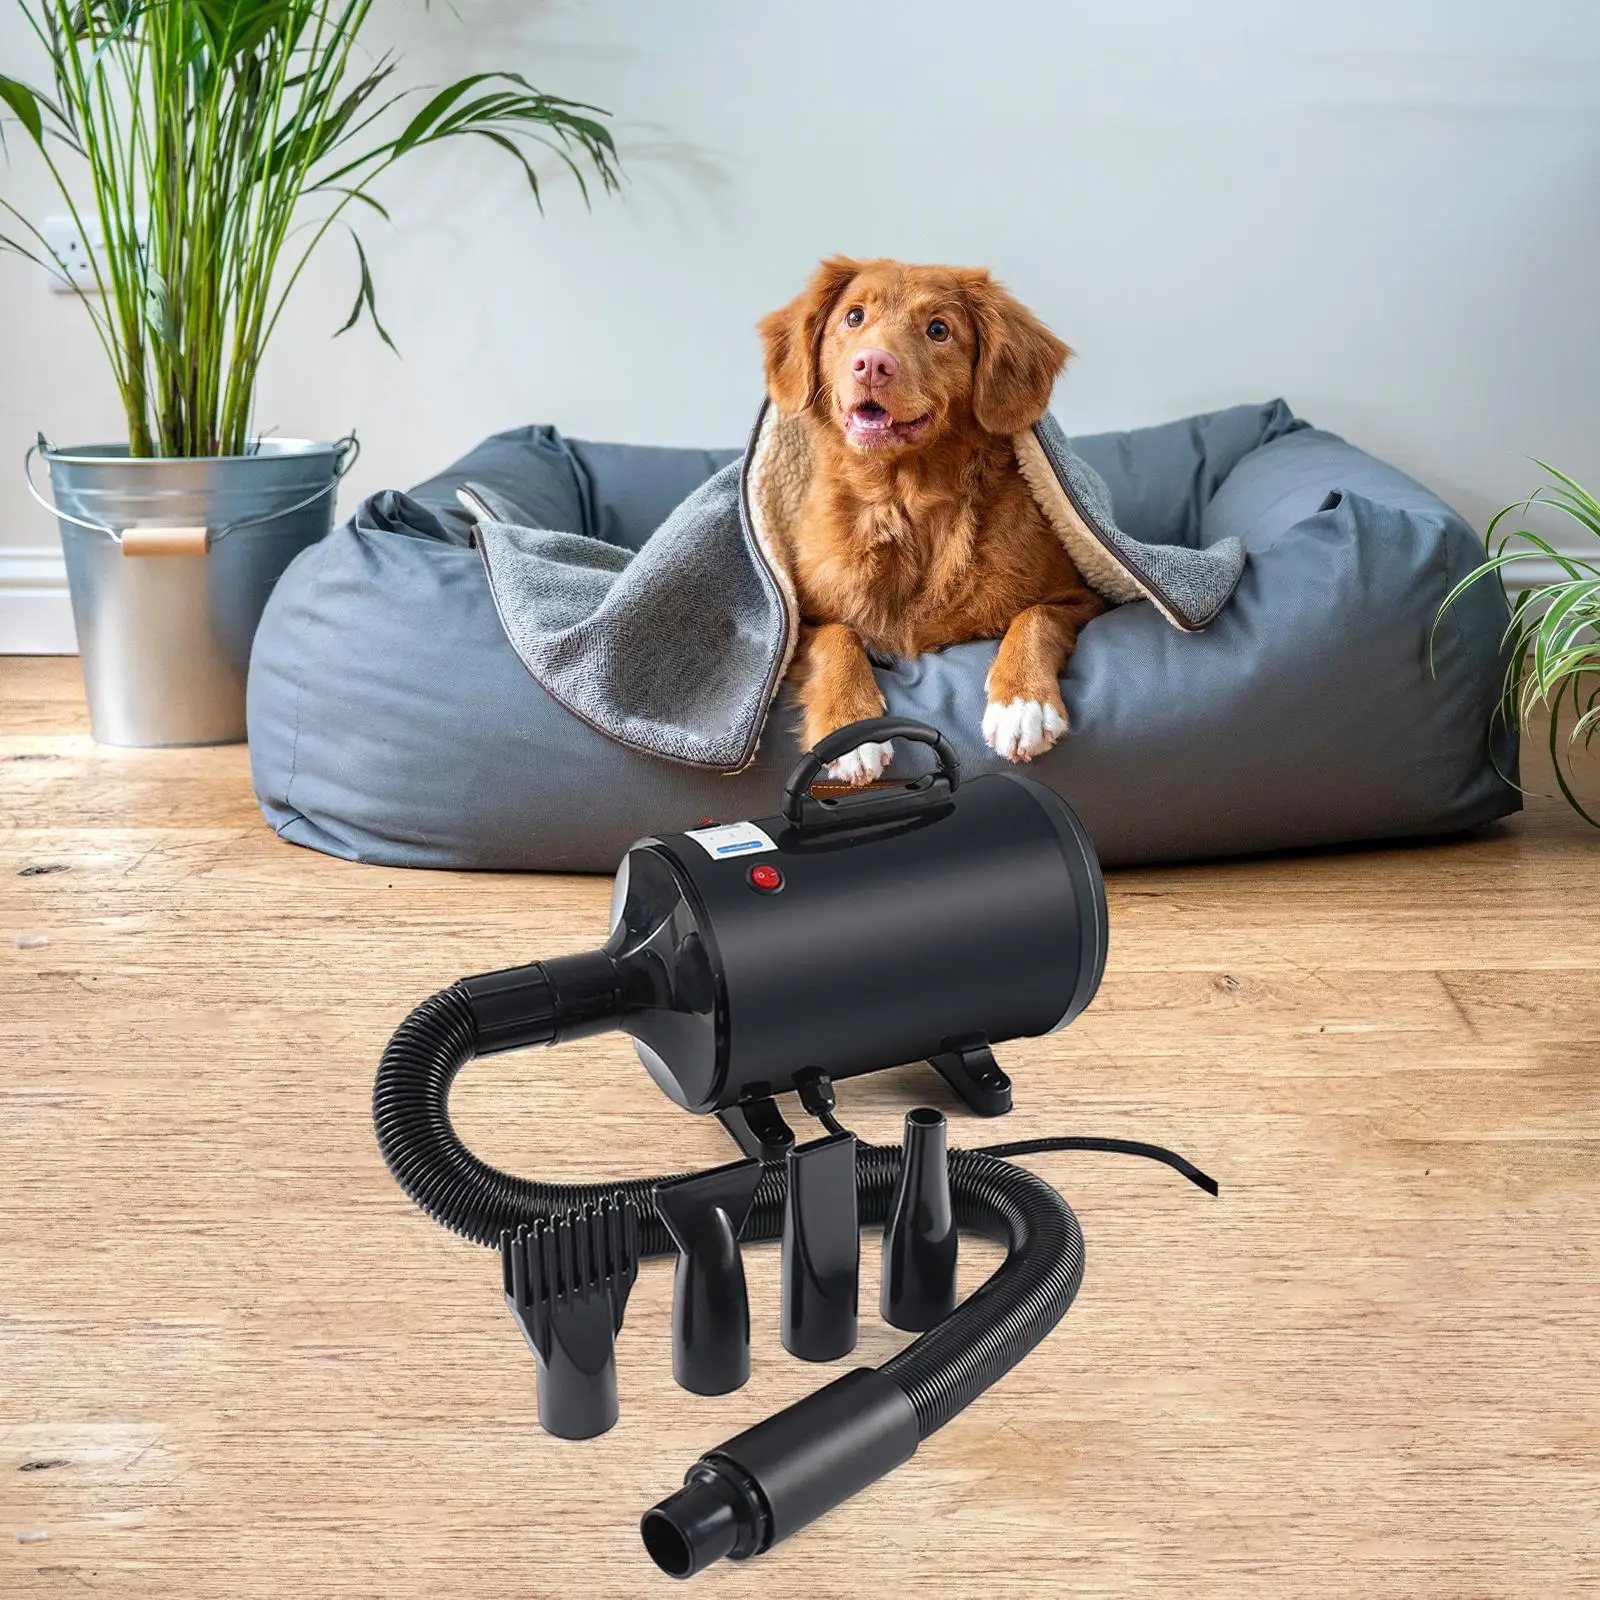 

Portable Dog Blow Dryer Grooming Hair Dryer Pet Blower Small Medium Large Dogs 2200W 4 Nozzles Hairdryer for Washing Bathing